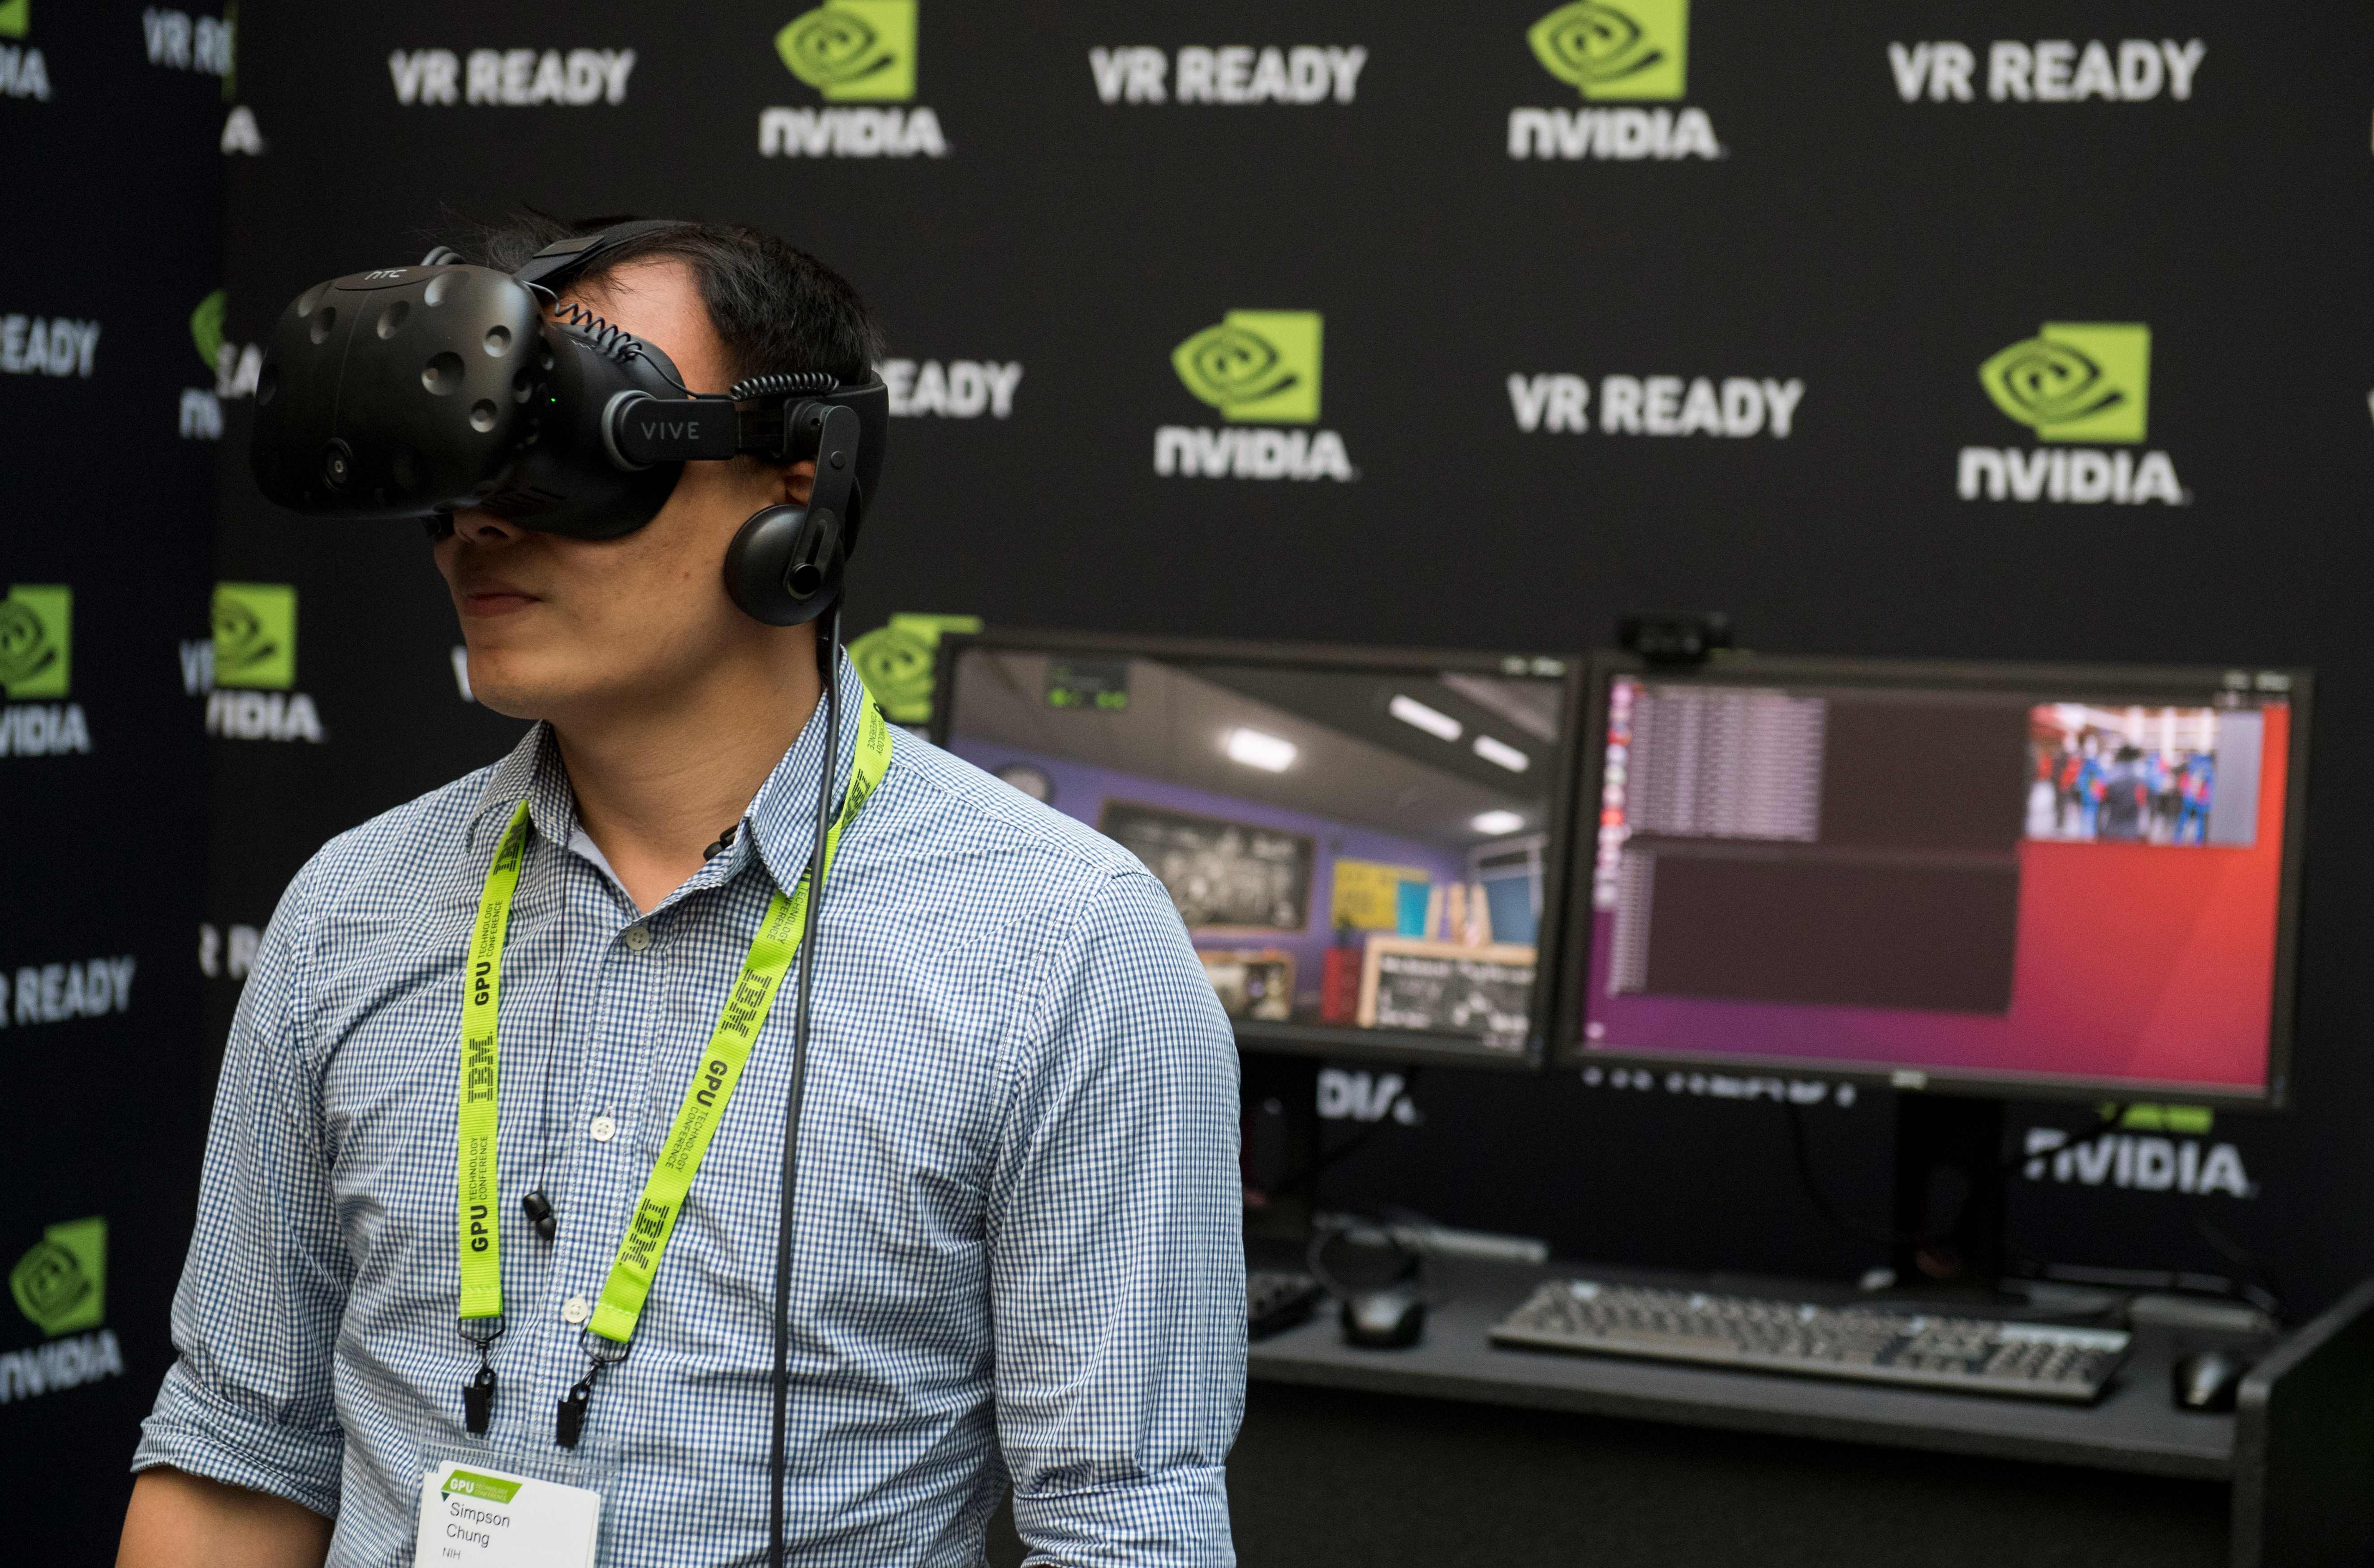 A virtual reality headset during the NVIDIA GPU Technology Conference, which showcased artificial intelligence, deep learning, virtual reality and autonomous machines in Washington last month. Photo: AFP